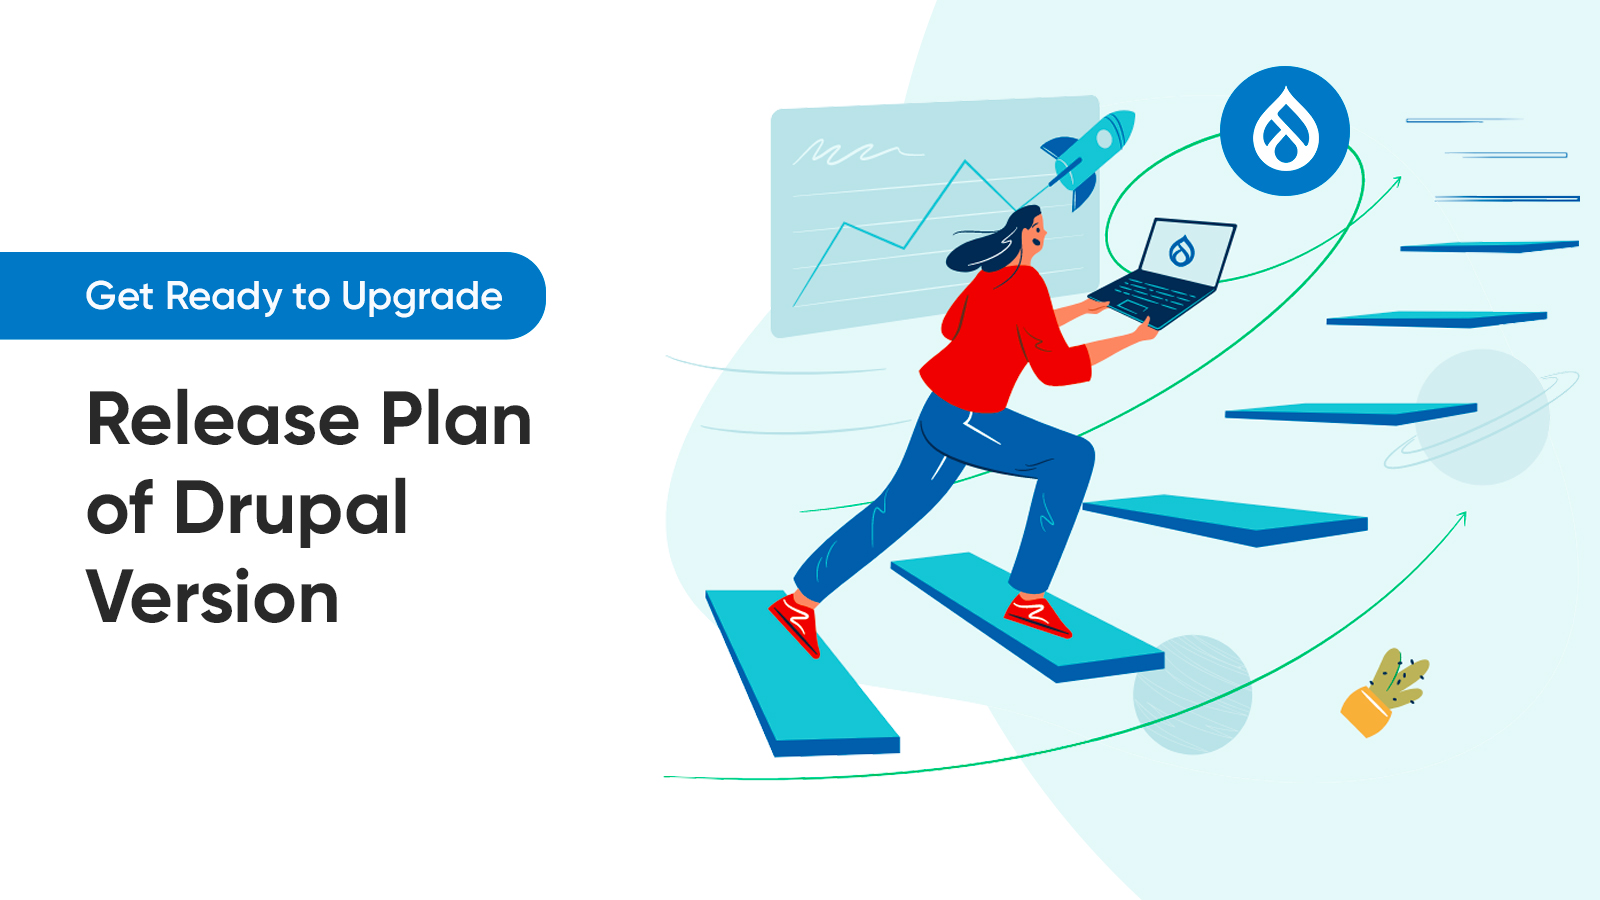 Release Plan of Drupal 10 Version: Get Ready to Upgrade